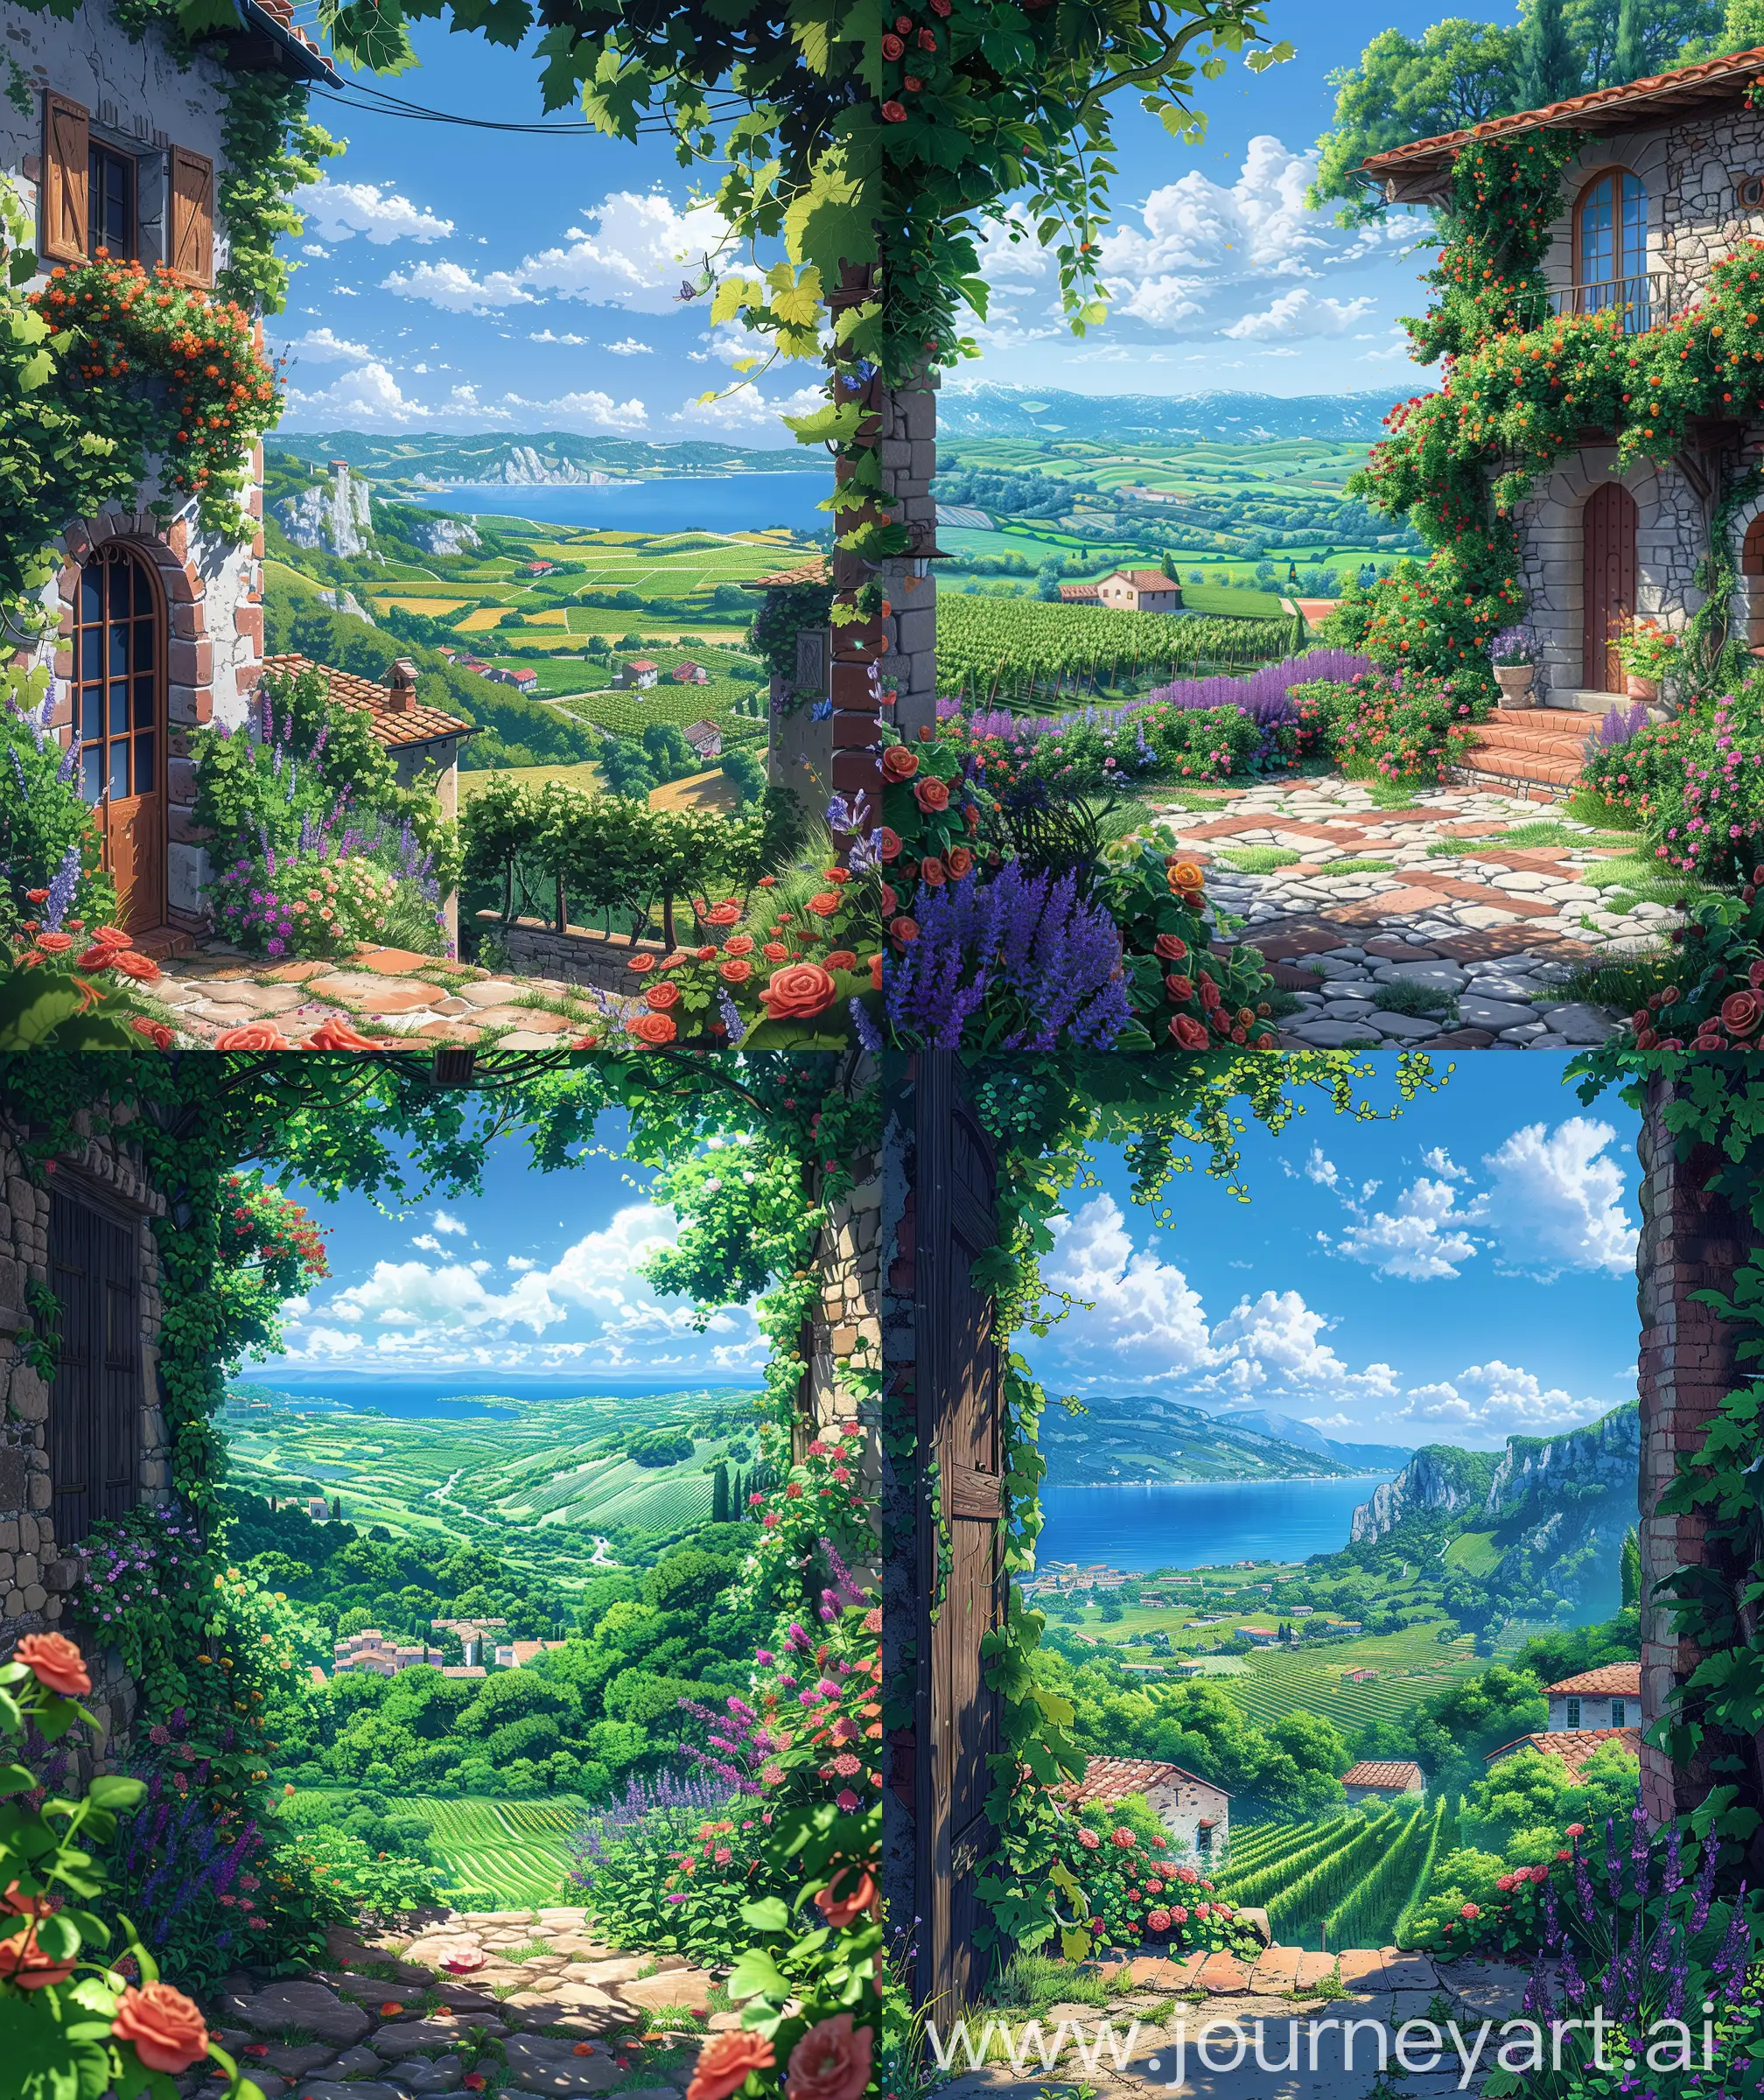 Beautiful anime scenary, illustration, mokoto shinkai style, direct front facade beautiful view of Tuscan valley, beautiful flowers, cove, ivy, grapes, flowers, lavender, roses, beautiful vibrant look, summer days, ultra HD, high quality, high resolution illustration anime, no blurry image, no hyperrealistic --ar 27:32 --s 600